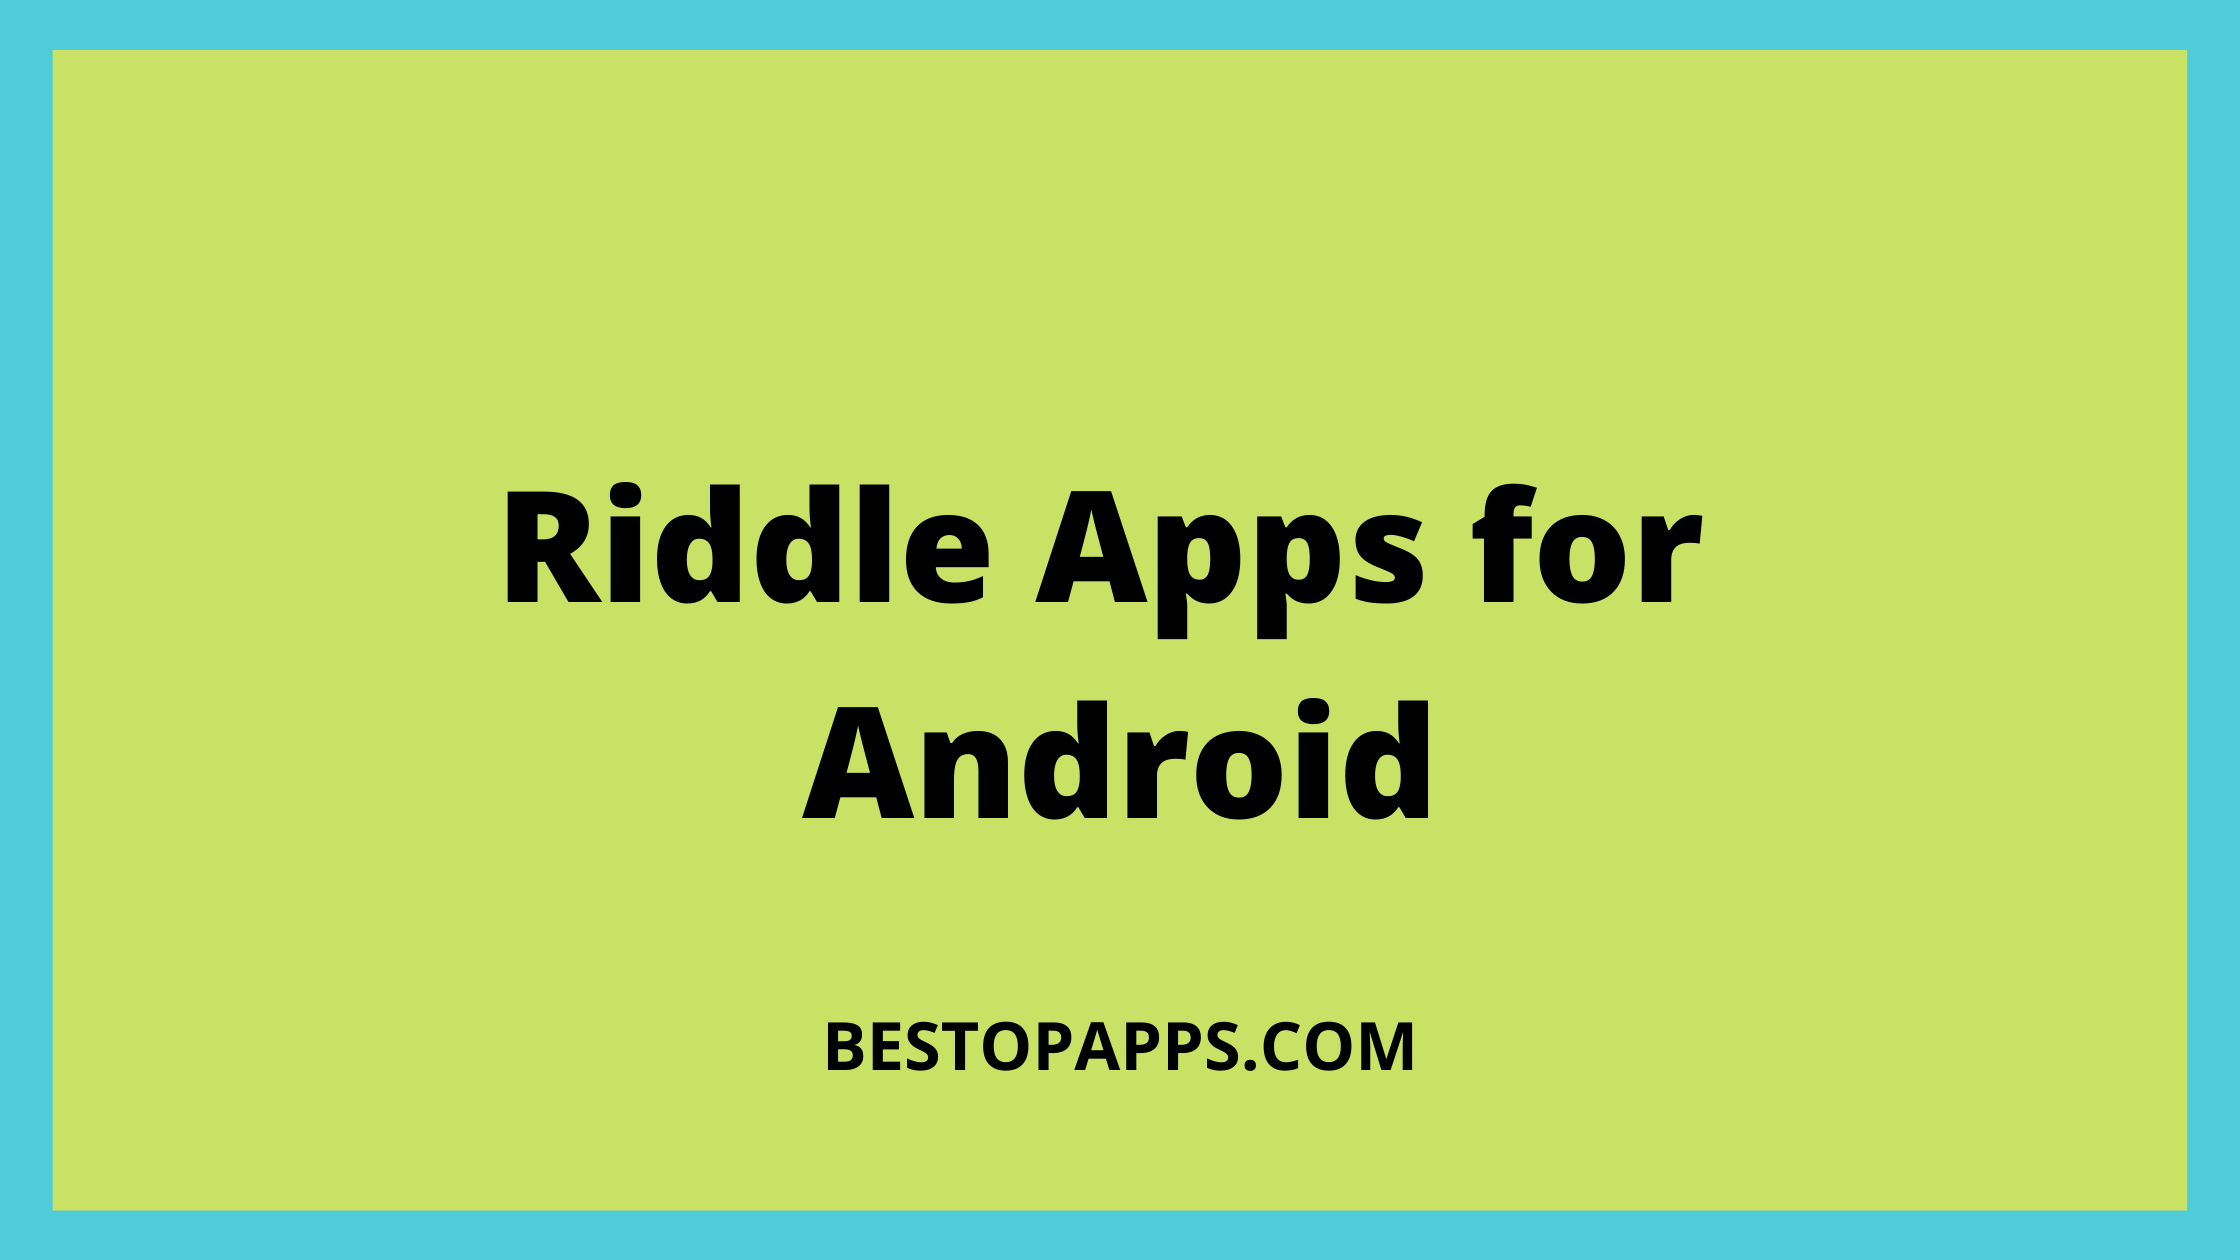 Riddle Apps for Android